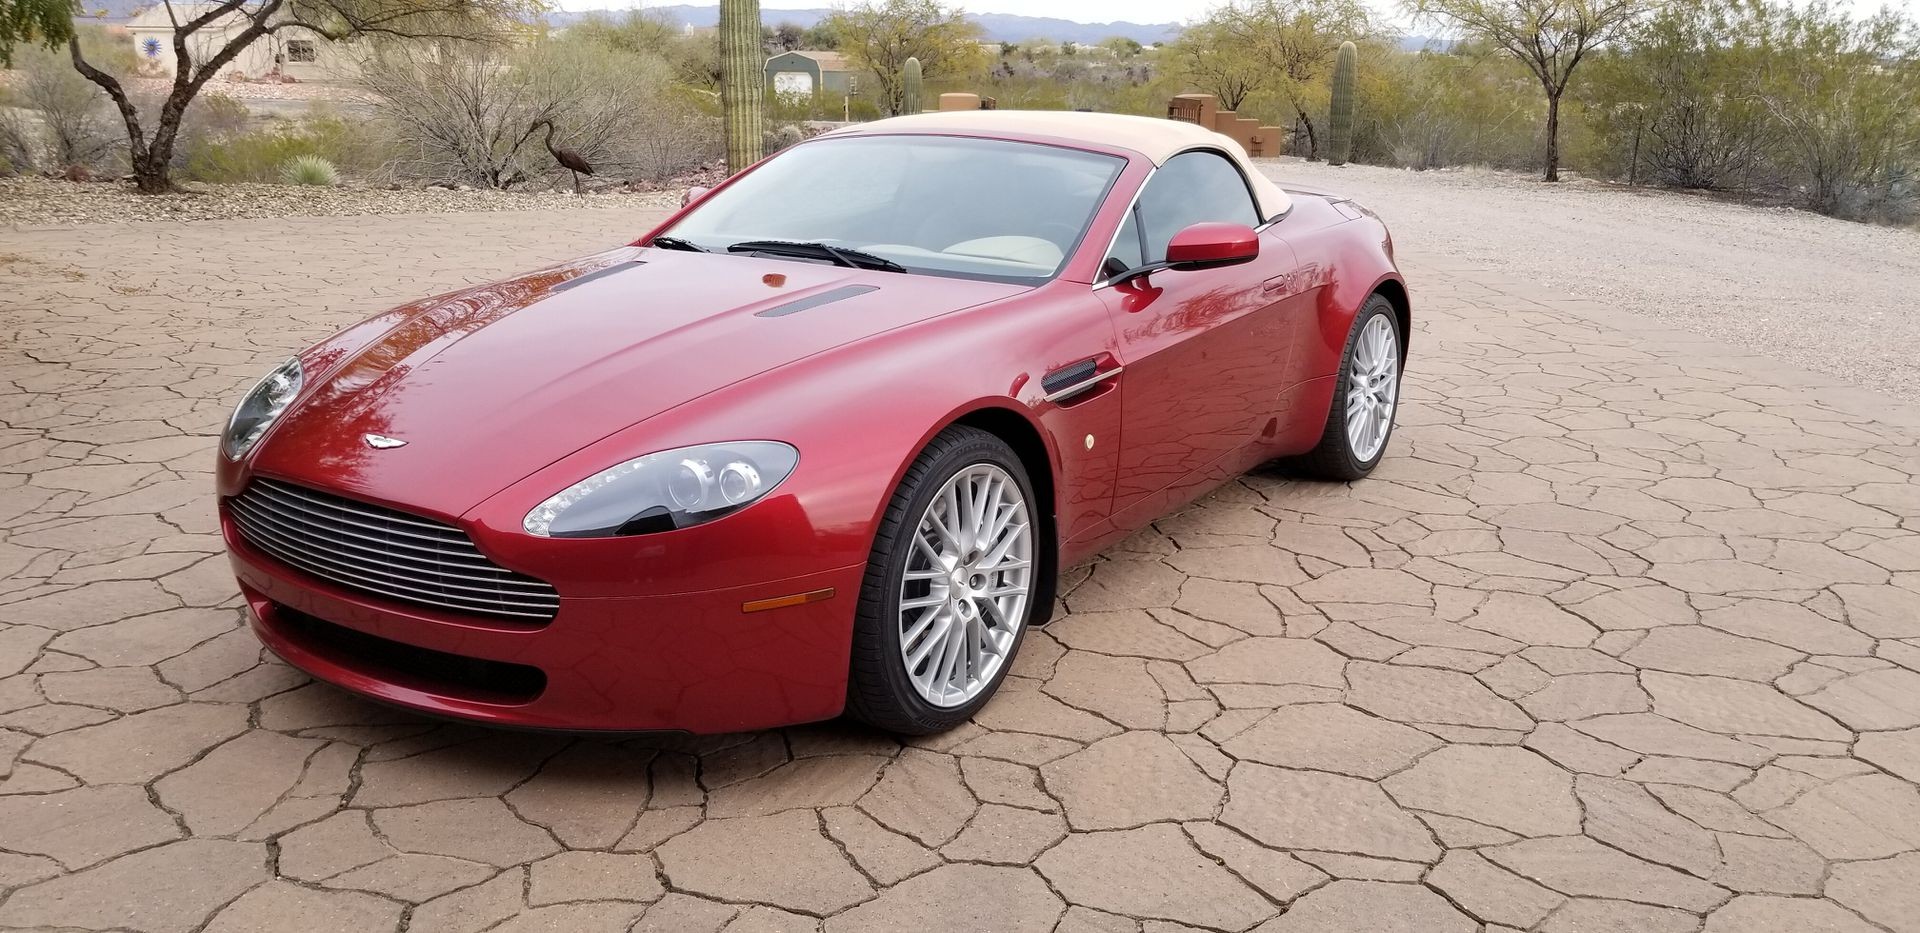 Find of the Day: This 2008 Aston Martin V8 Vantage Roadster Purrs Like a Kitten